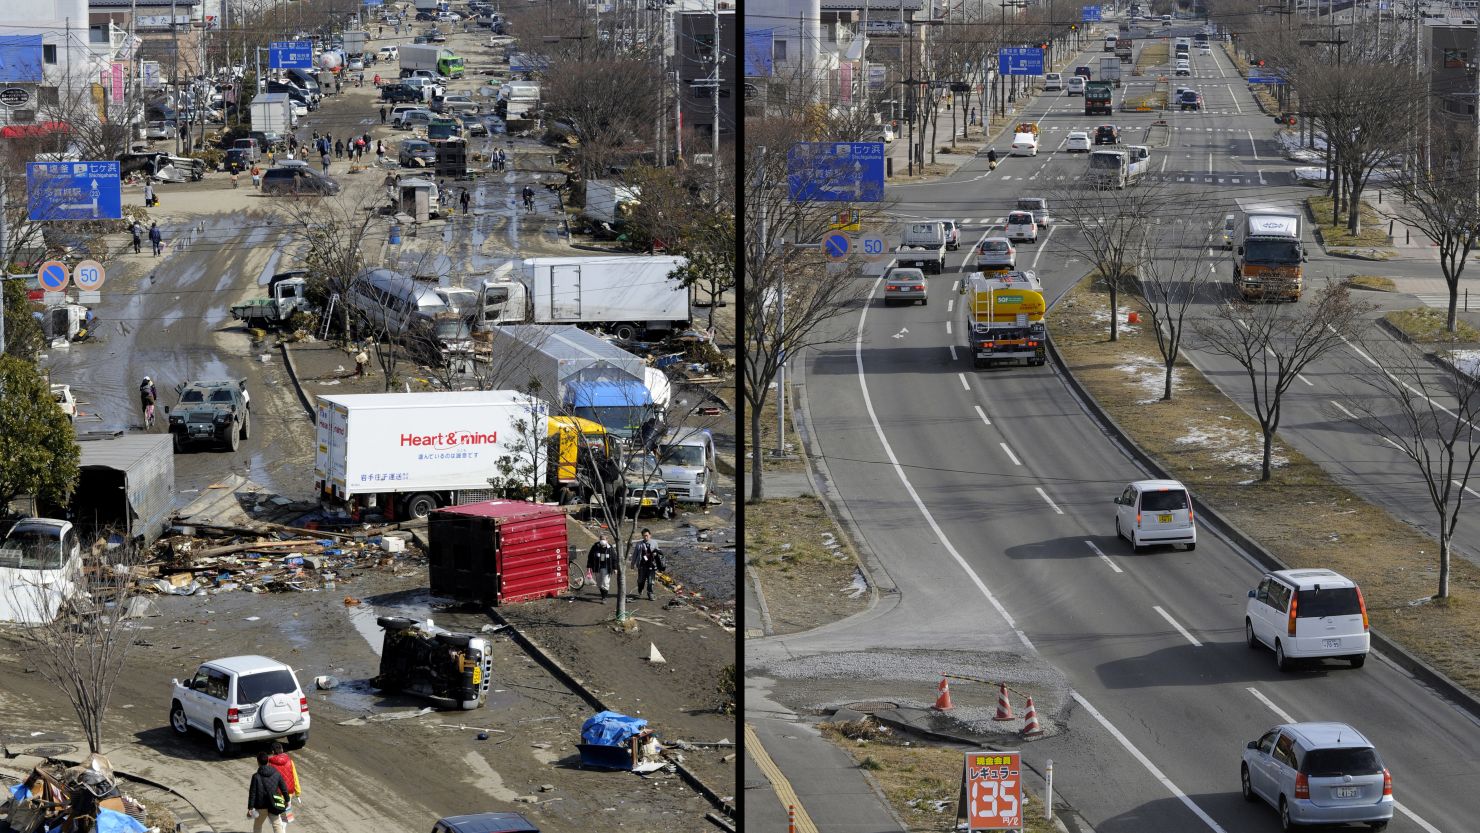 Image from the town of Tagajo in Miyagi prefecture contrasts the post-disaster chaos with the same scene a year later.